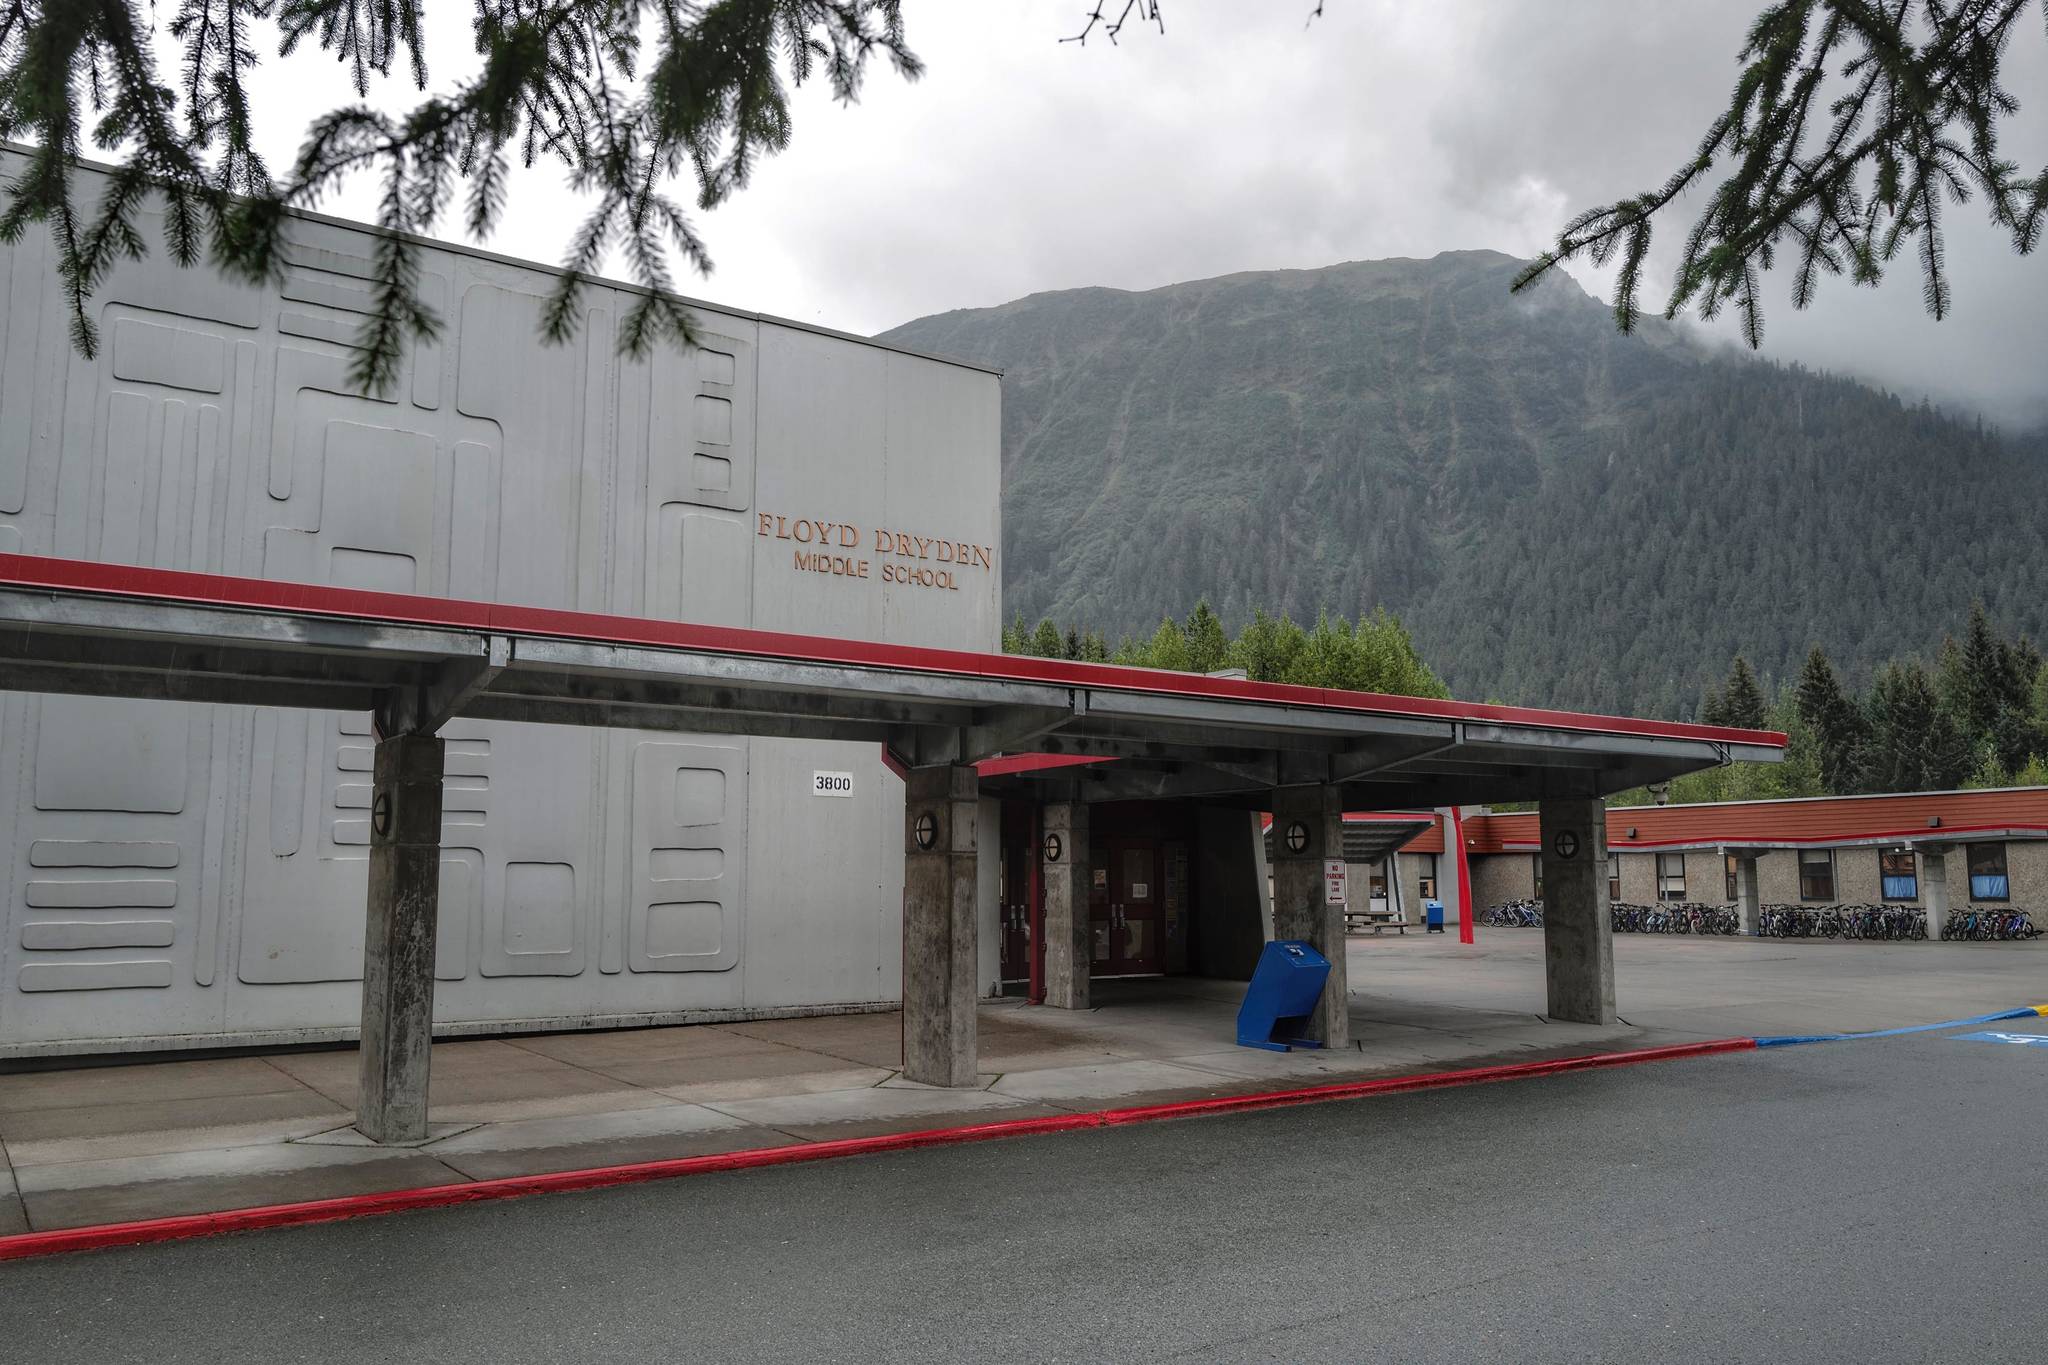 Two students from Floyd Dryden Middle School were arrested for terroristic threatening, or planning to commit a school shooting, on Thursday. (Michael Penn | Juneau Empire)